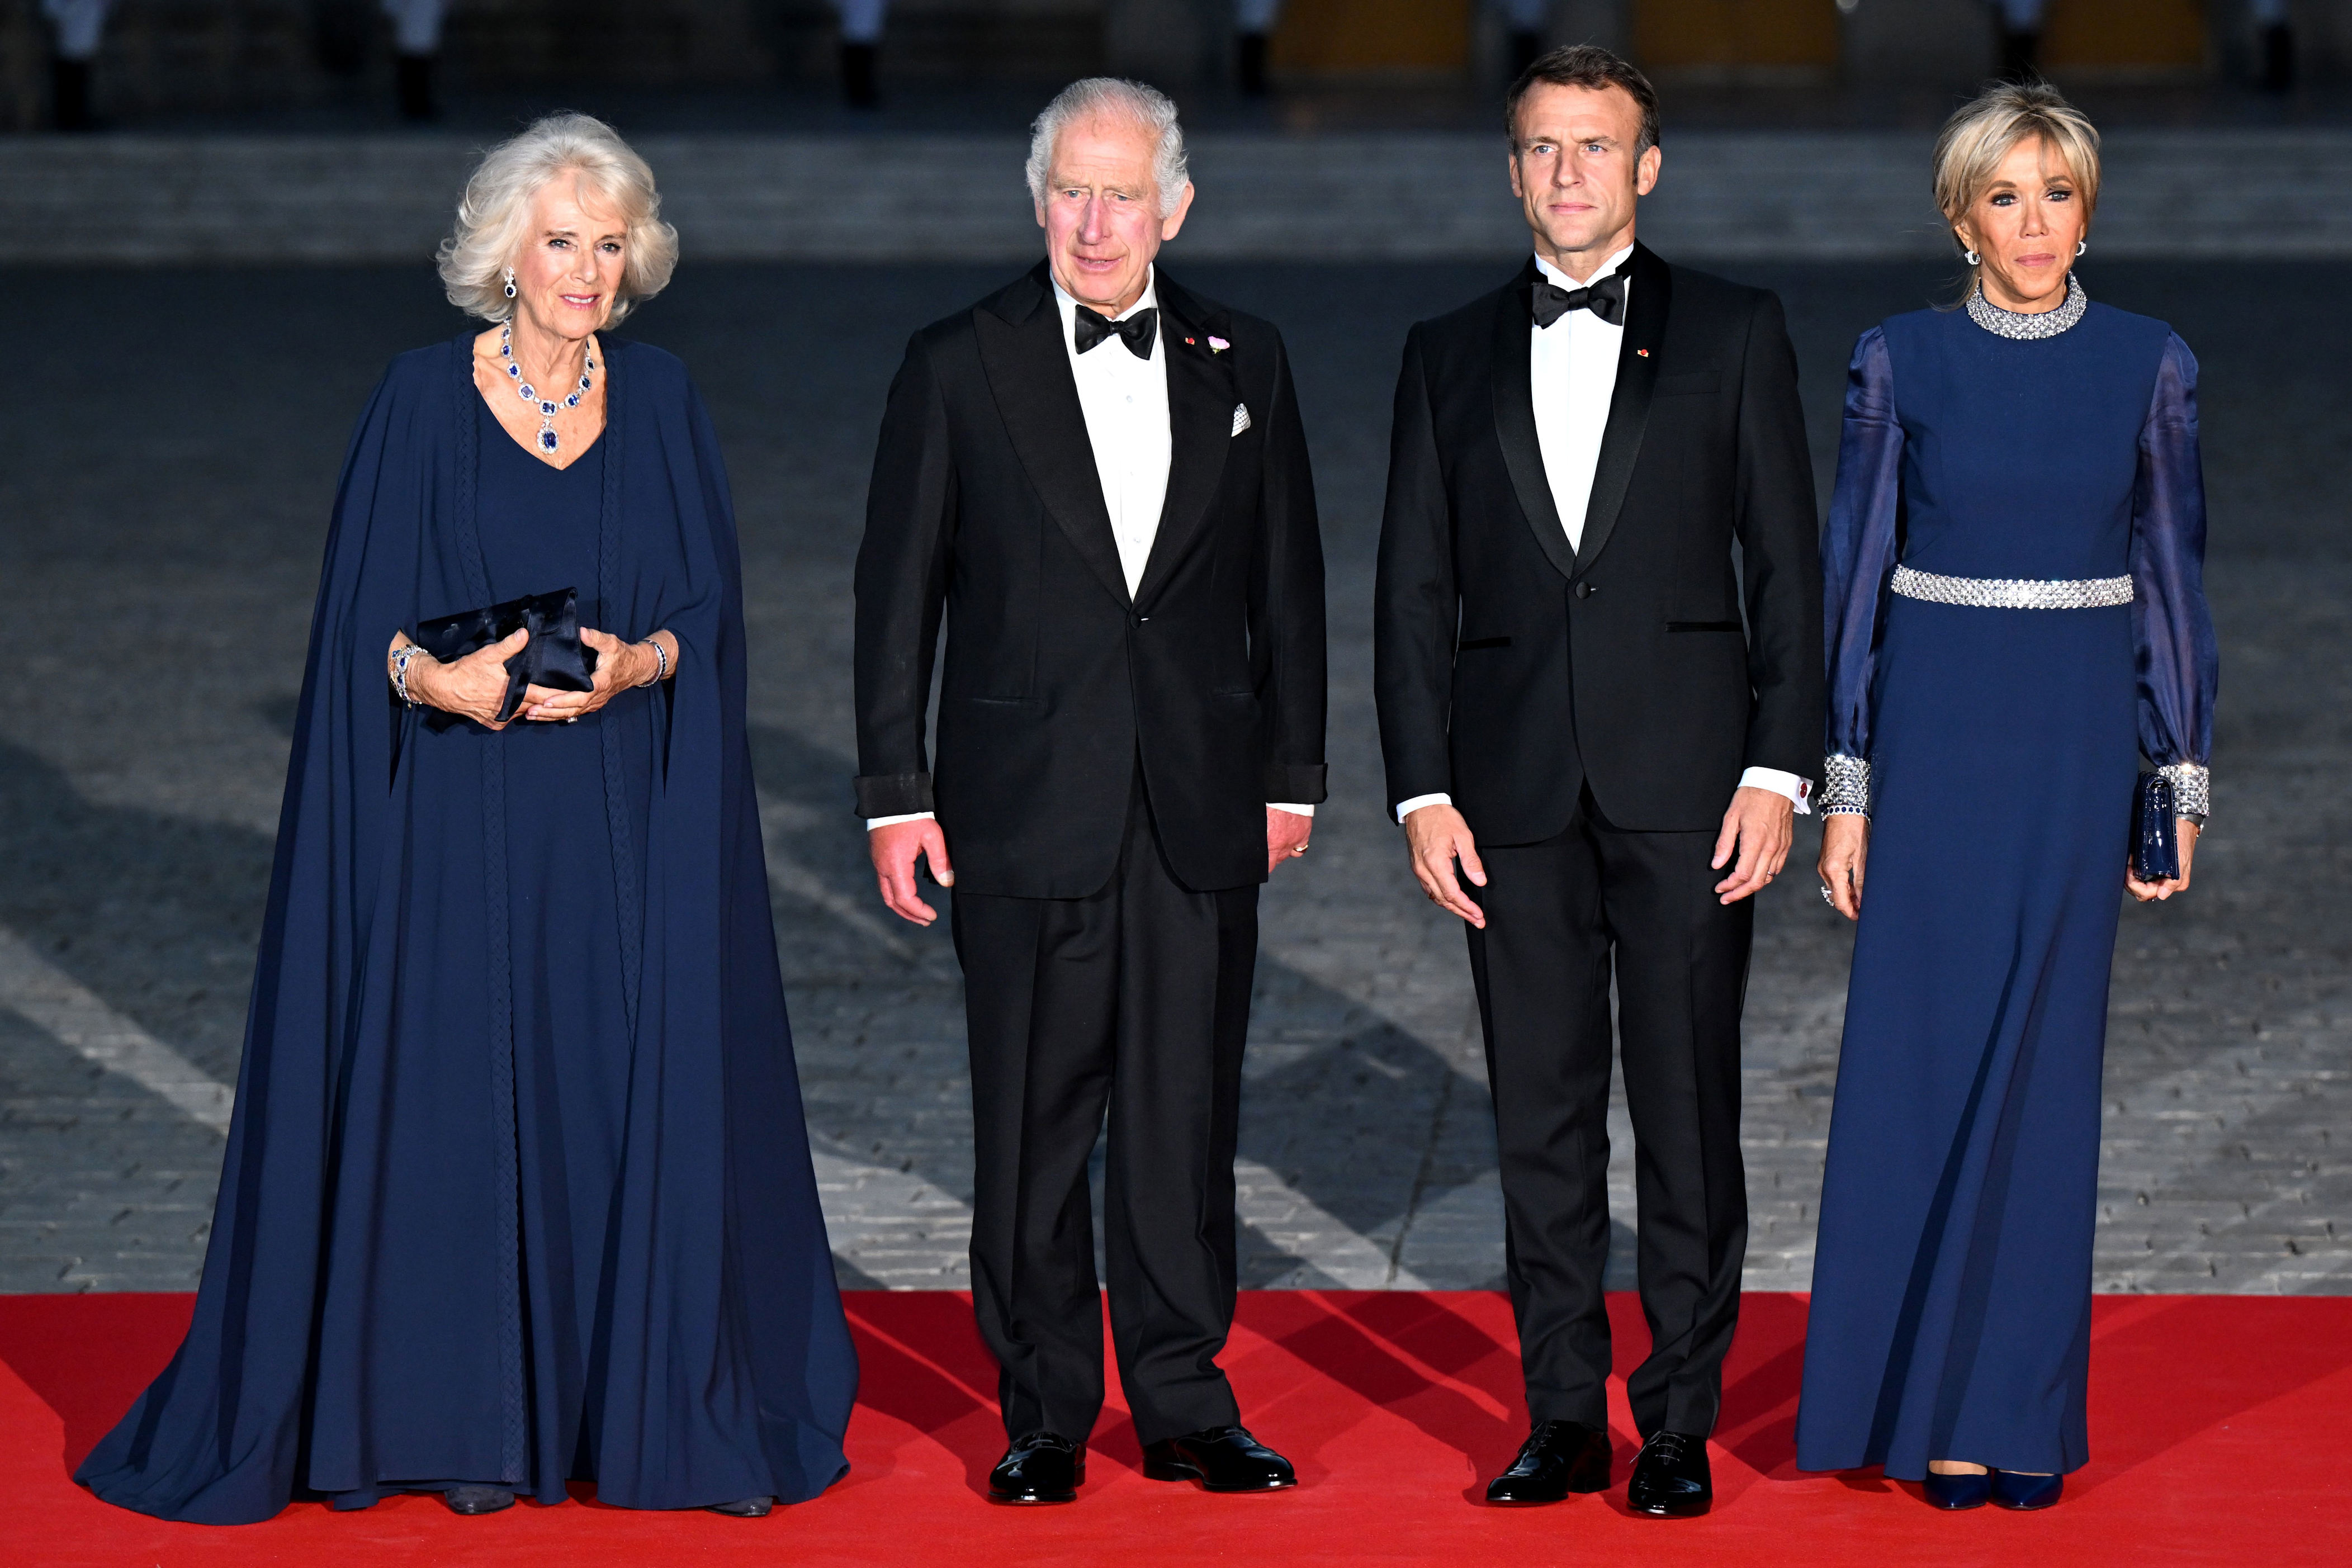 <p><span>Queen Camilla and King Charles III joined France's President Emmanuel Macron and first lady Brigitte Macron as they arrived at the Palace of Versailles outside Paris to celebrate the U.K.-France relationship at a state banquet on Sept. 20, 2023, the first night of </span><a href="https://www.wonderwall.com/entertainment/king-charles-iii-and-queen-camilla-in-france-see-the-best-photos-from-the-royals-official-state-visit-791038.gallery">the British royals' three-day visit</a><span>.</span></p><p>MORE: <a href="https://www.wonderwall.com/celebrity/royals-line-british-throne-order-succession-3012158.gallery?photoId=648489">The first 29 British royals in the line of succession behind King Charles III</a></p>